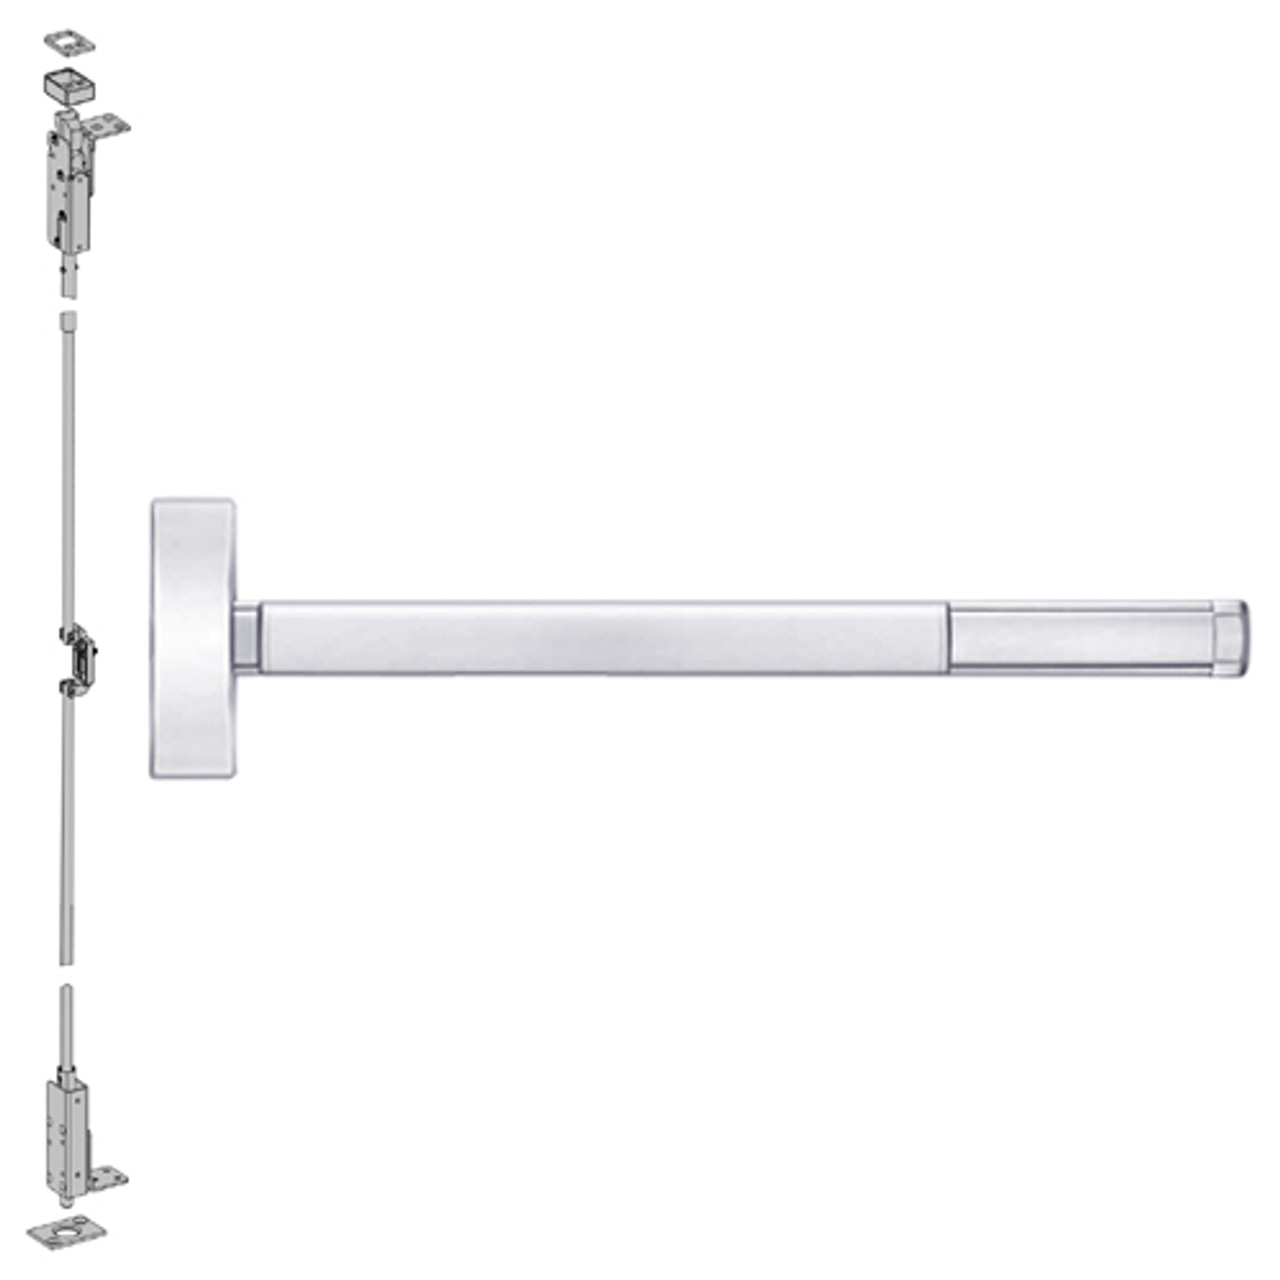 2705CD-625-48 PHI 2700 Series Wood Door Concealed Vertical Rod Device Prepped for Key Controls Thumb Piece with Cylinder Dogging in Bright Chrome Finish